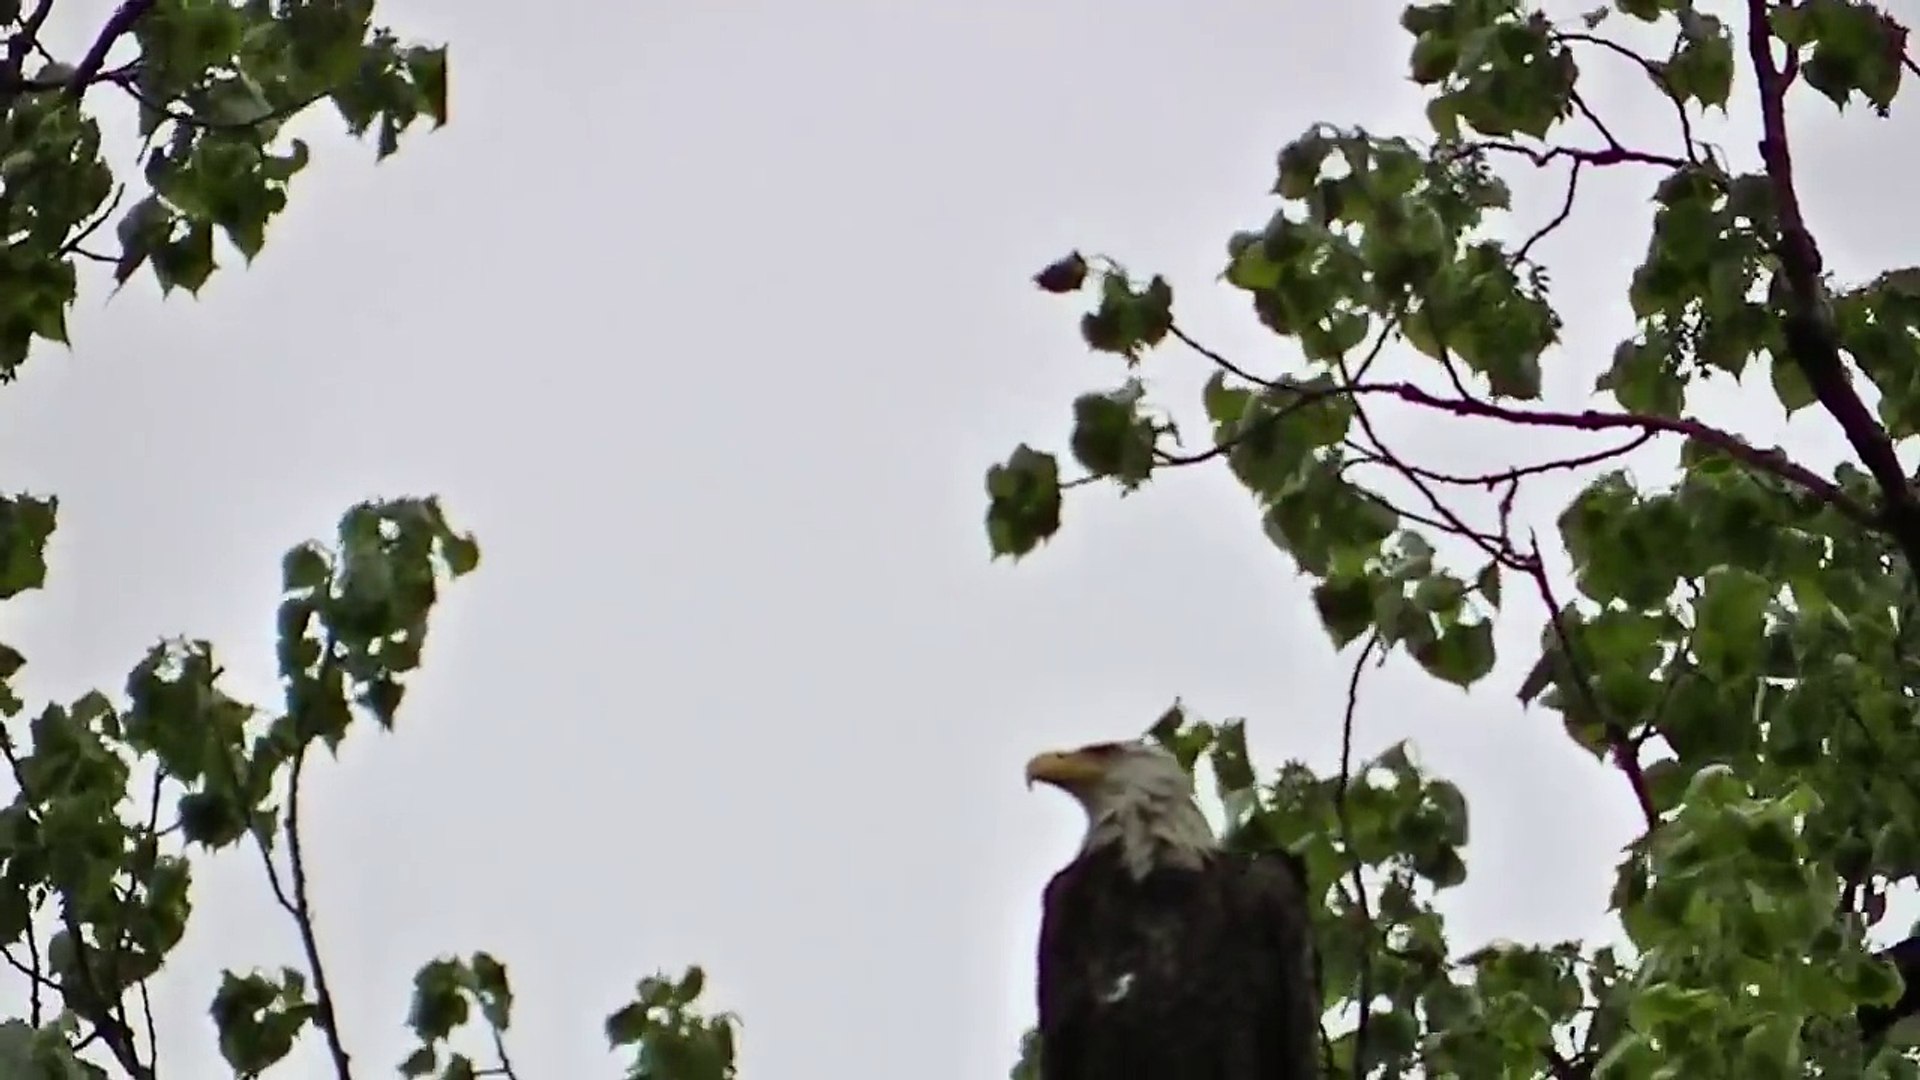 BALD EAGLE ATTACKED BY CROWS AT STANLEY PARK